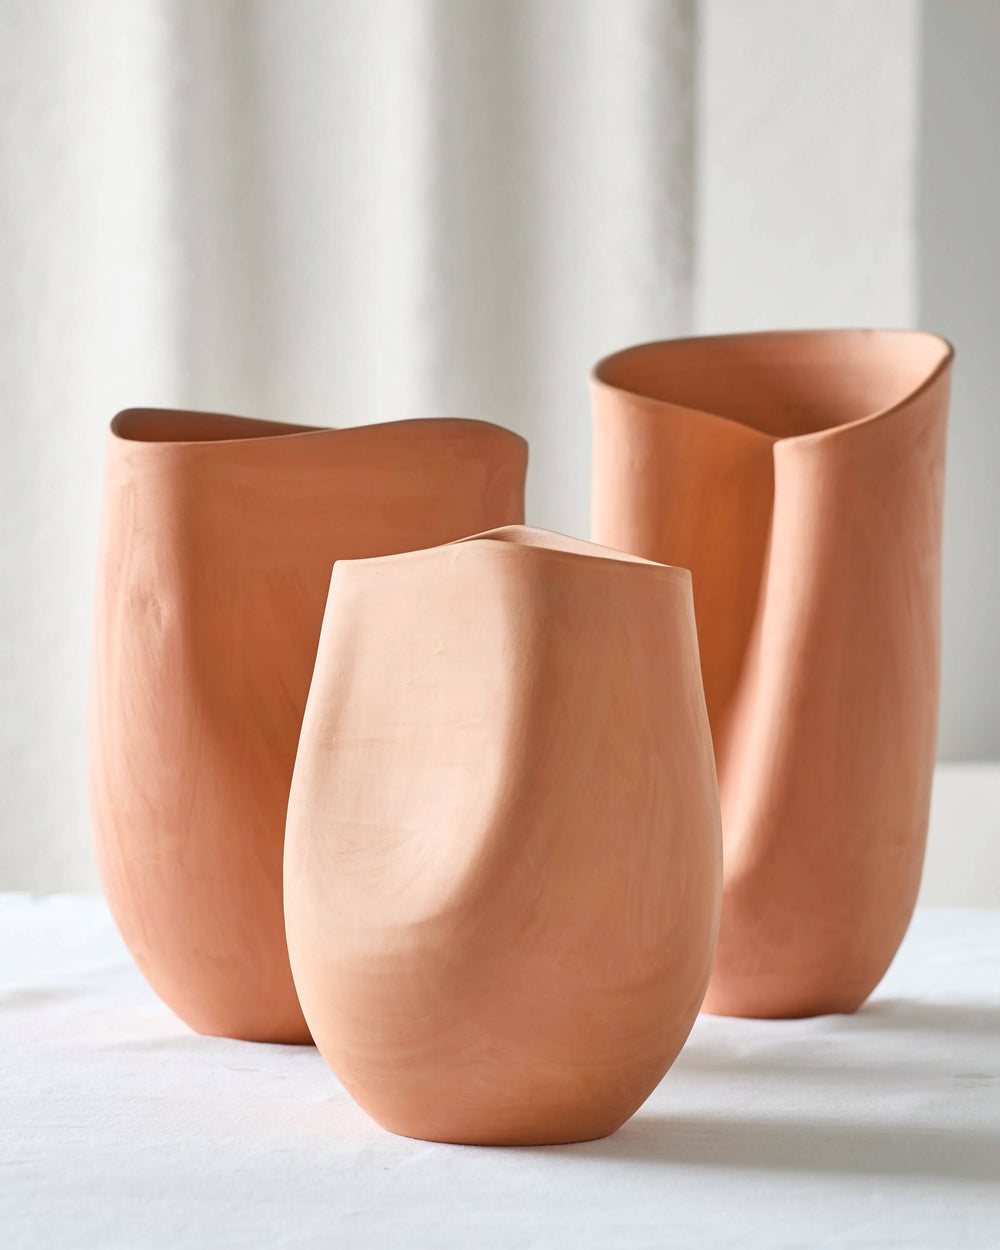 Tahj Terracotta Vases on white table. Handcrafted terracotta clay with sculptural design.